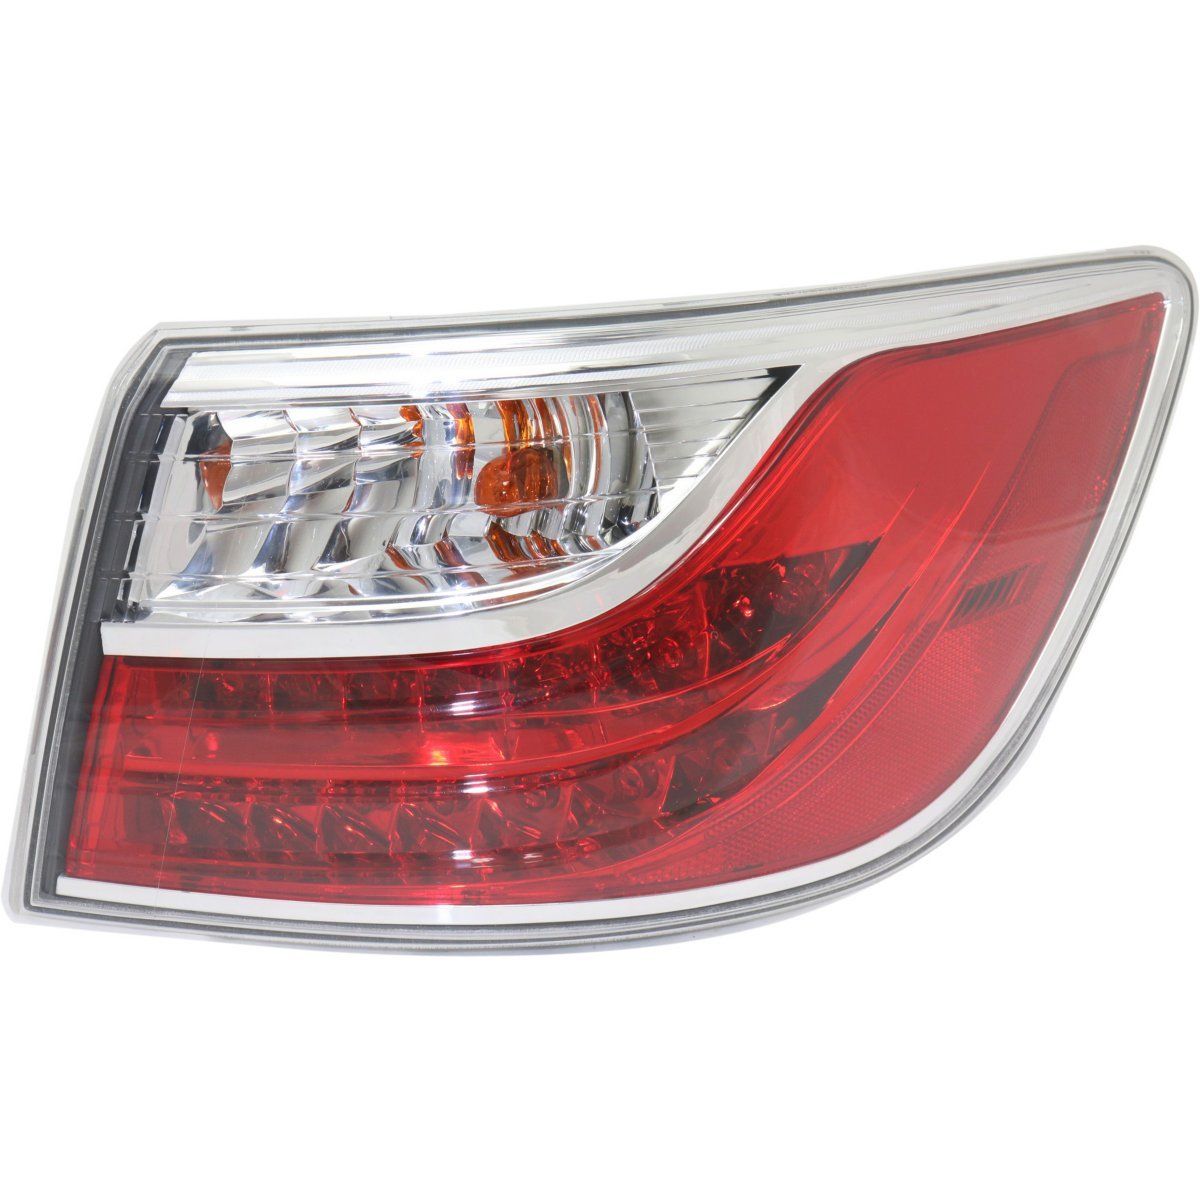 Halogen Tail Light For 2010-2012 Mazda CX-9 Right Outer Clear/Red w/ Bulbs CAPA | eBay 2012 Mazda Cx 9 Tail Light Cover